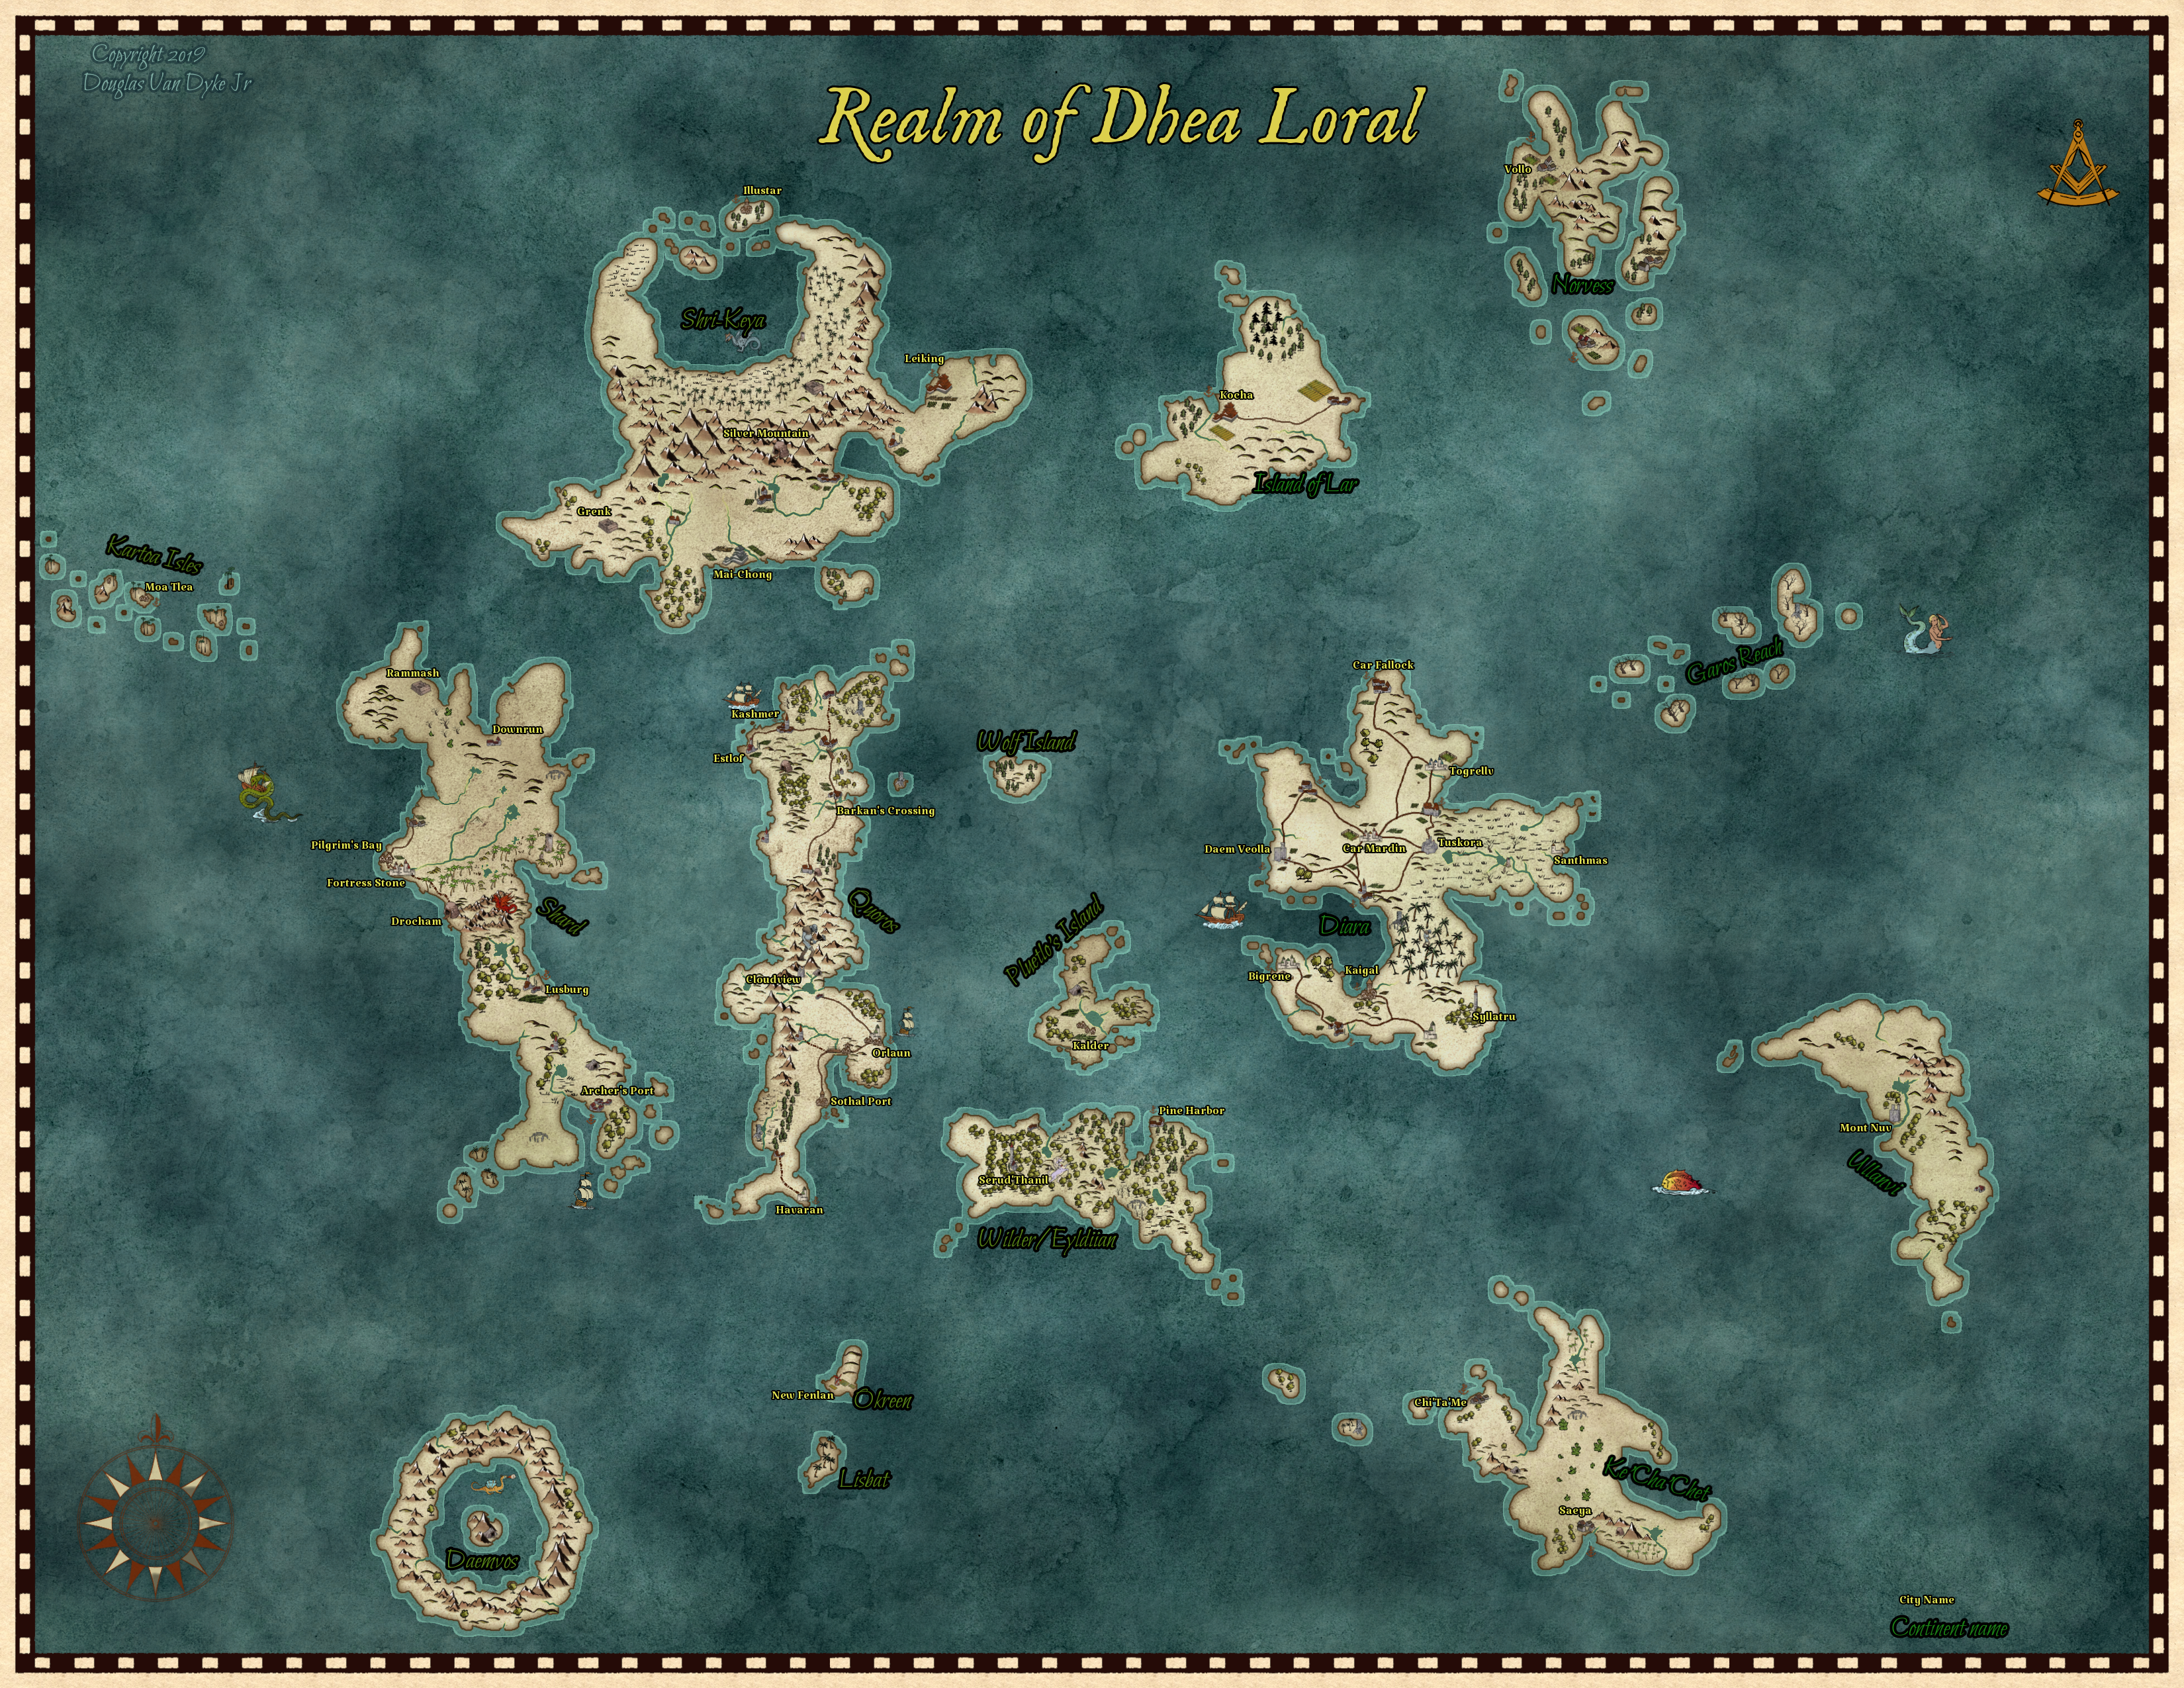 An Updated Map of the Realm